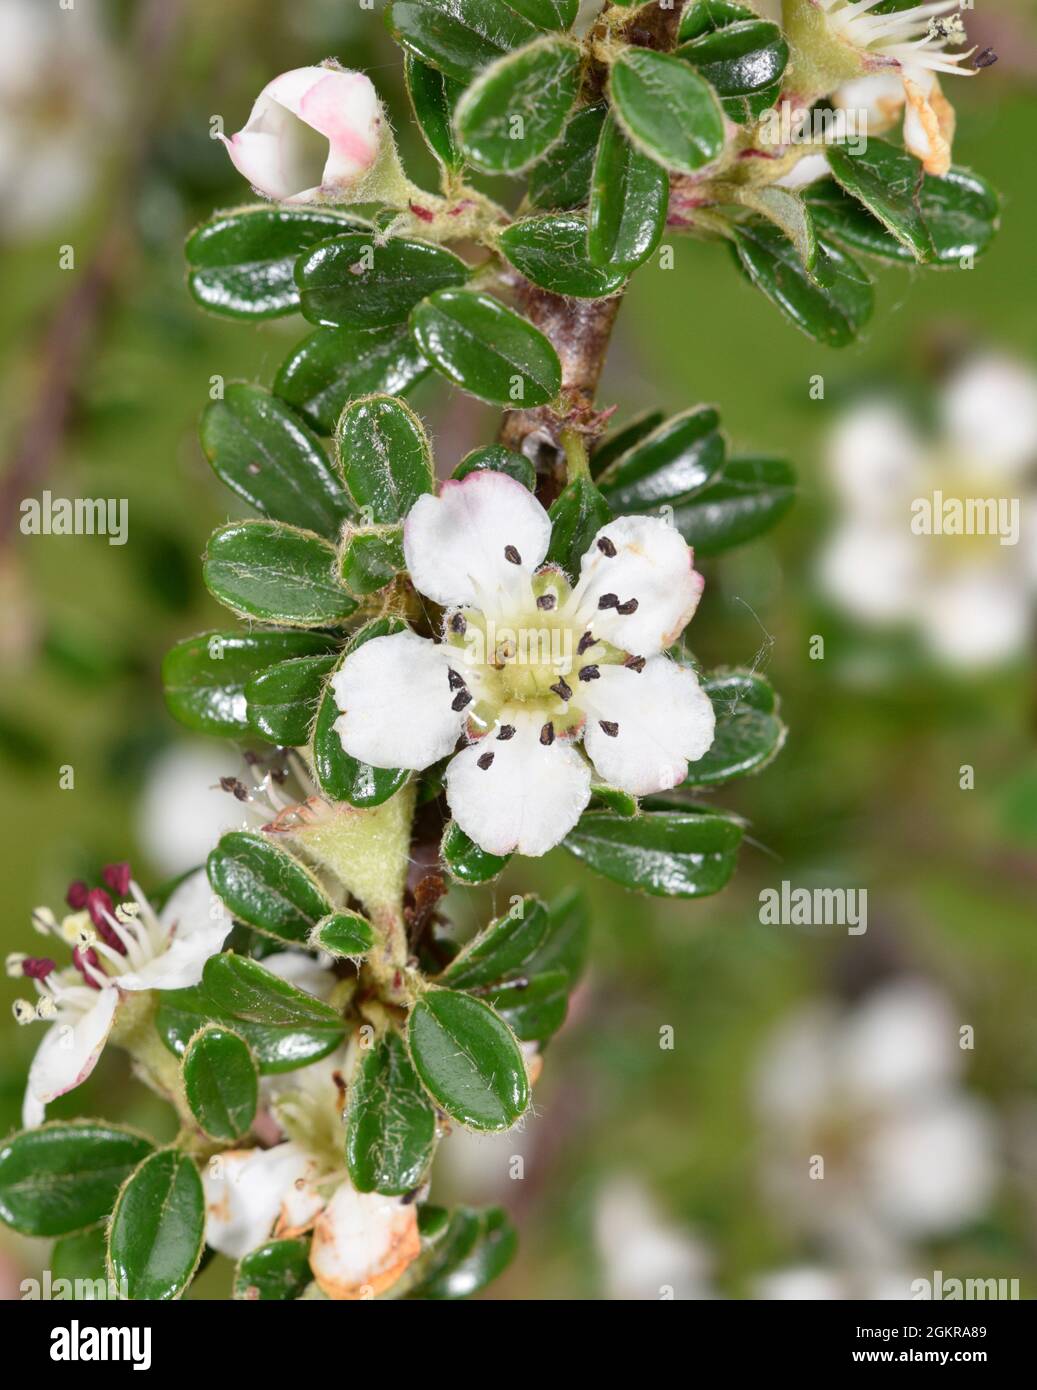 Small-leaved Cotoneaster - Cotoneaster Chaenopetalum microphyllus Stock Photo